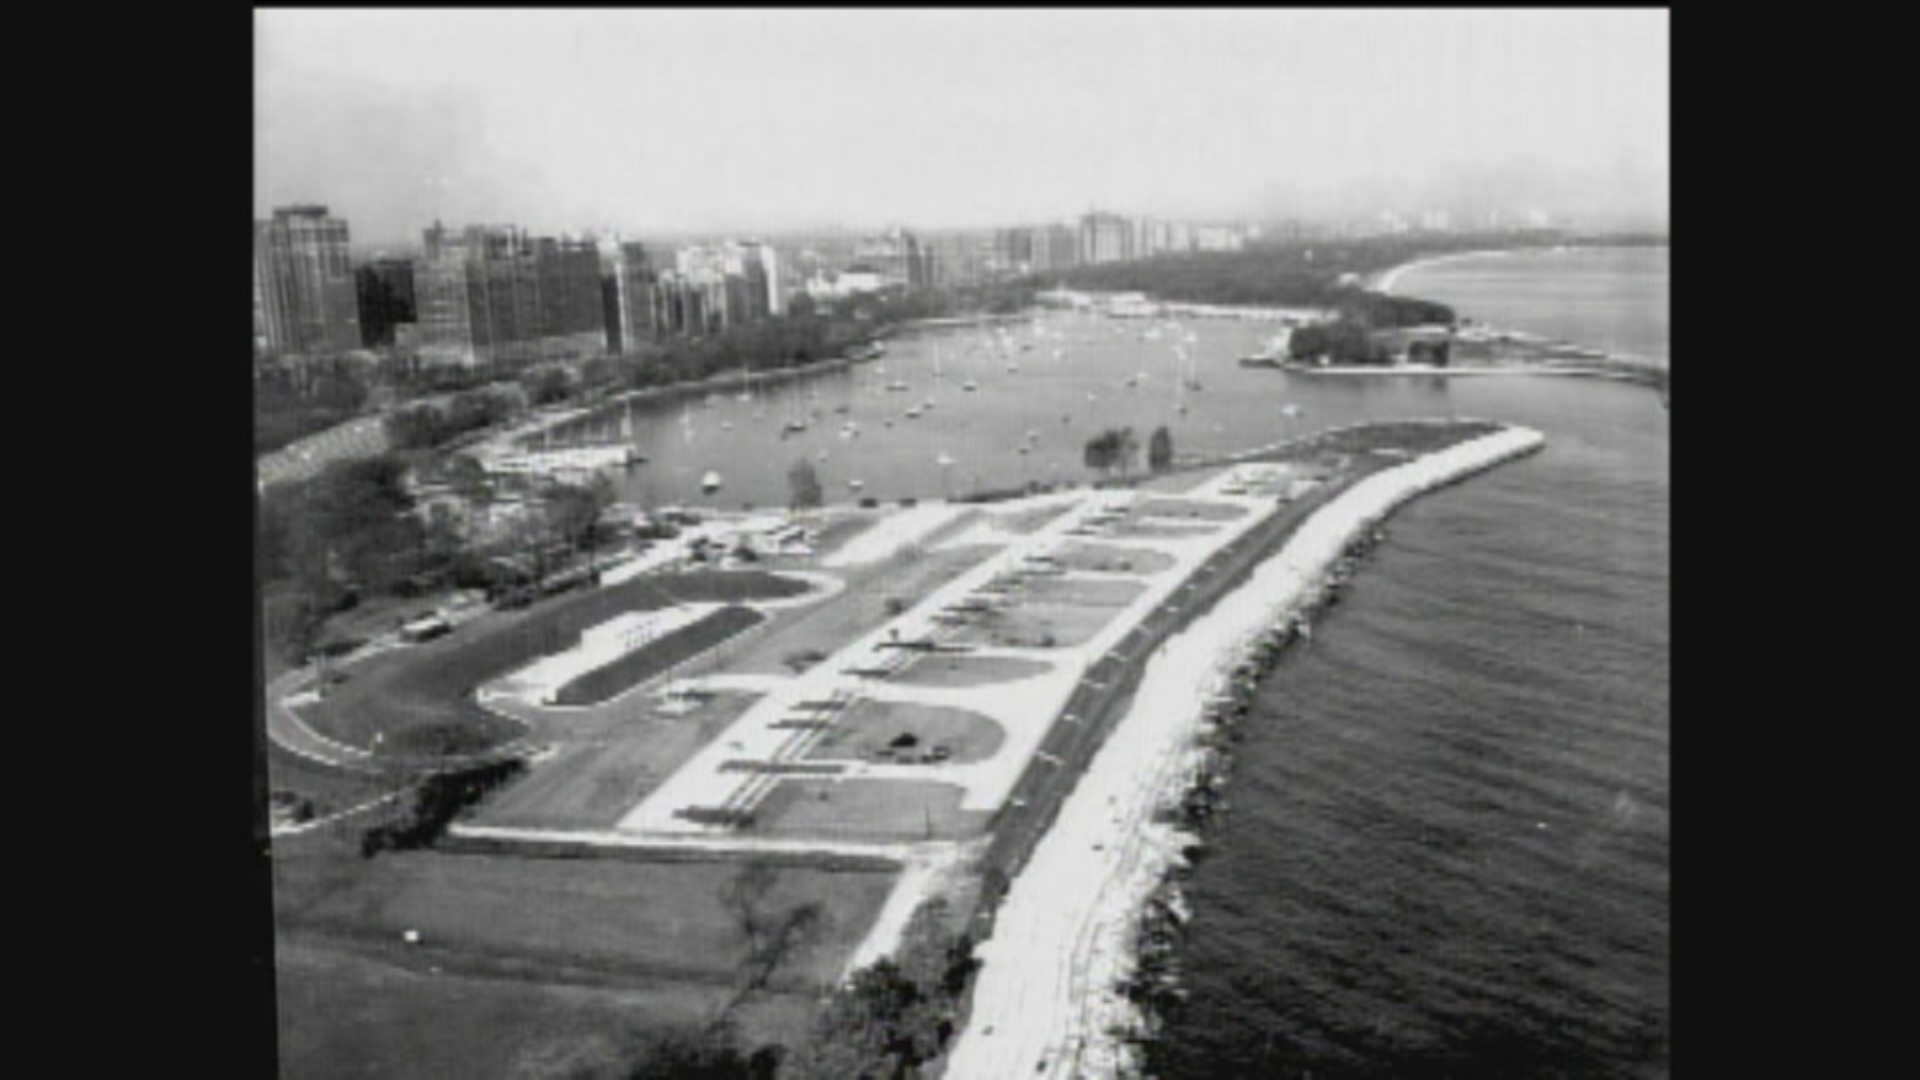 A battery of Nike missiles was installed at Belmont Harbor in the early 1950s. (WTTW Archive)